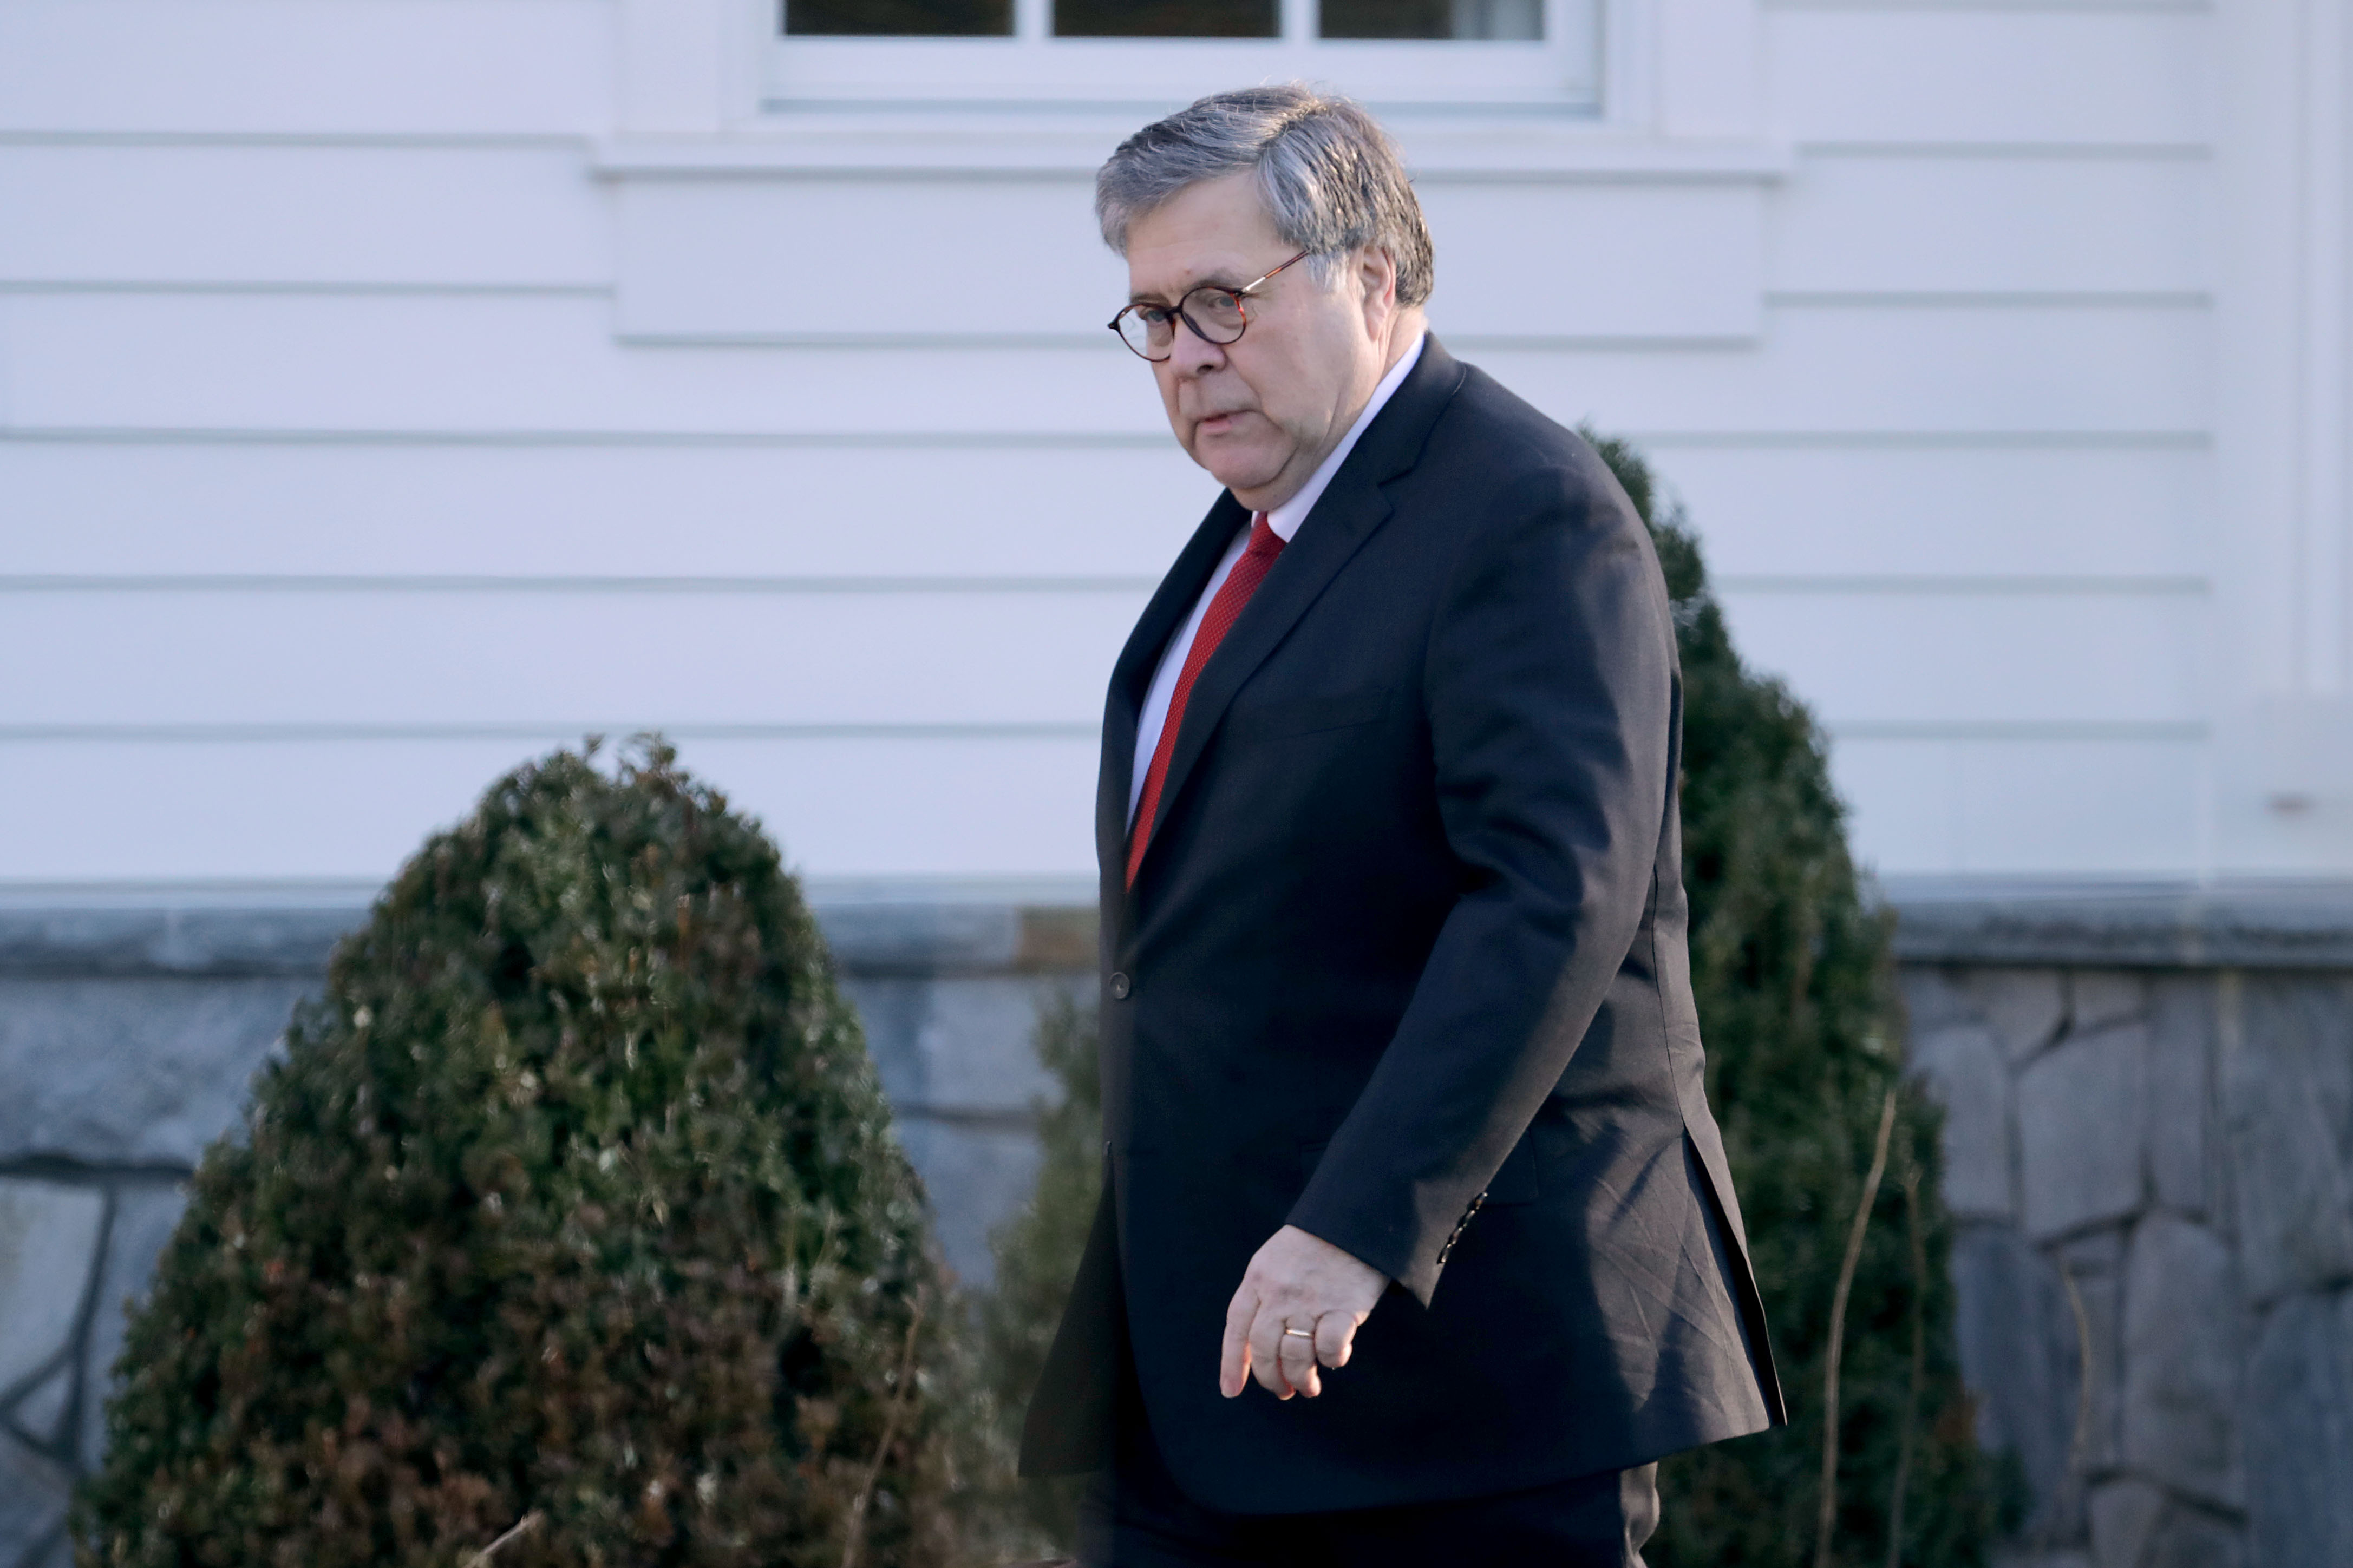 U.S. Attorney General William Barr leaves his home March 25, 2019 in McLean, Virginia. (Photo by Chip Somodevilla/Getty Images)